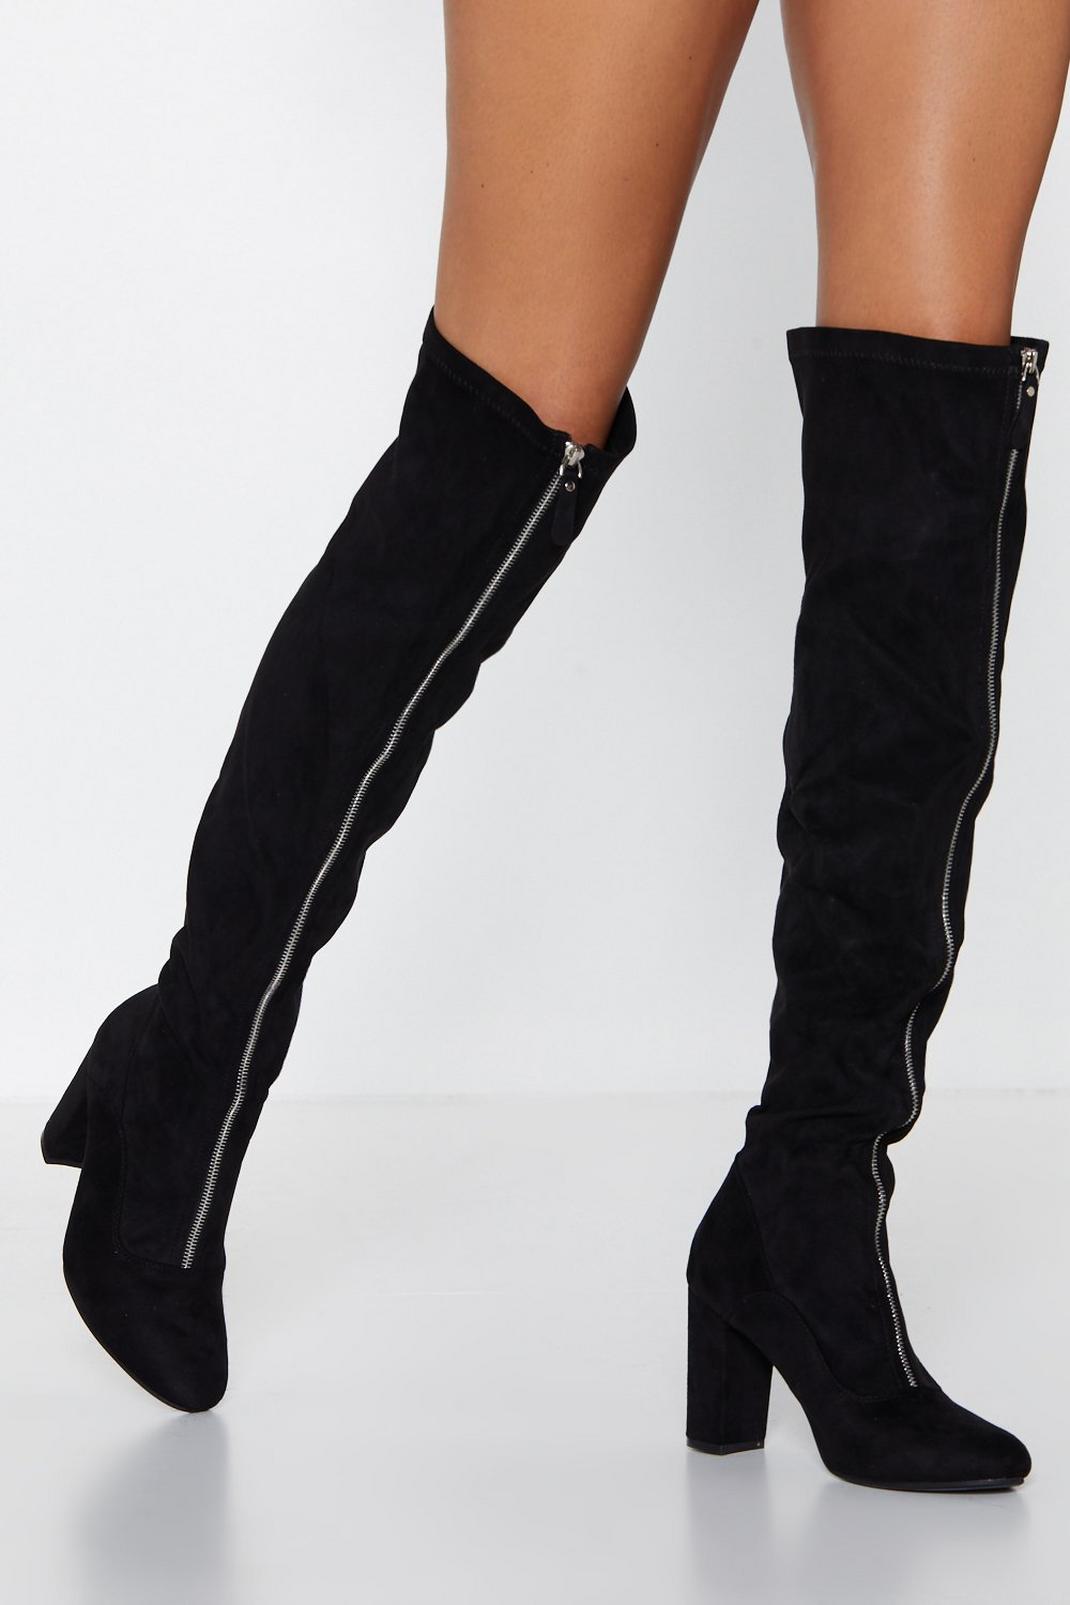 Take a Zip of This Over-the-Knee Boot